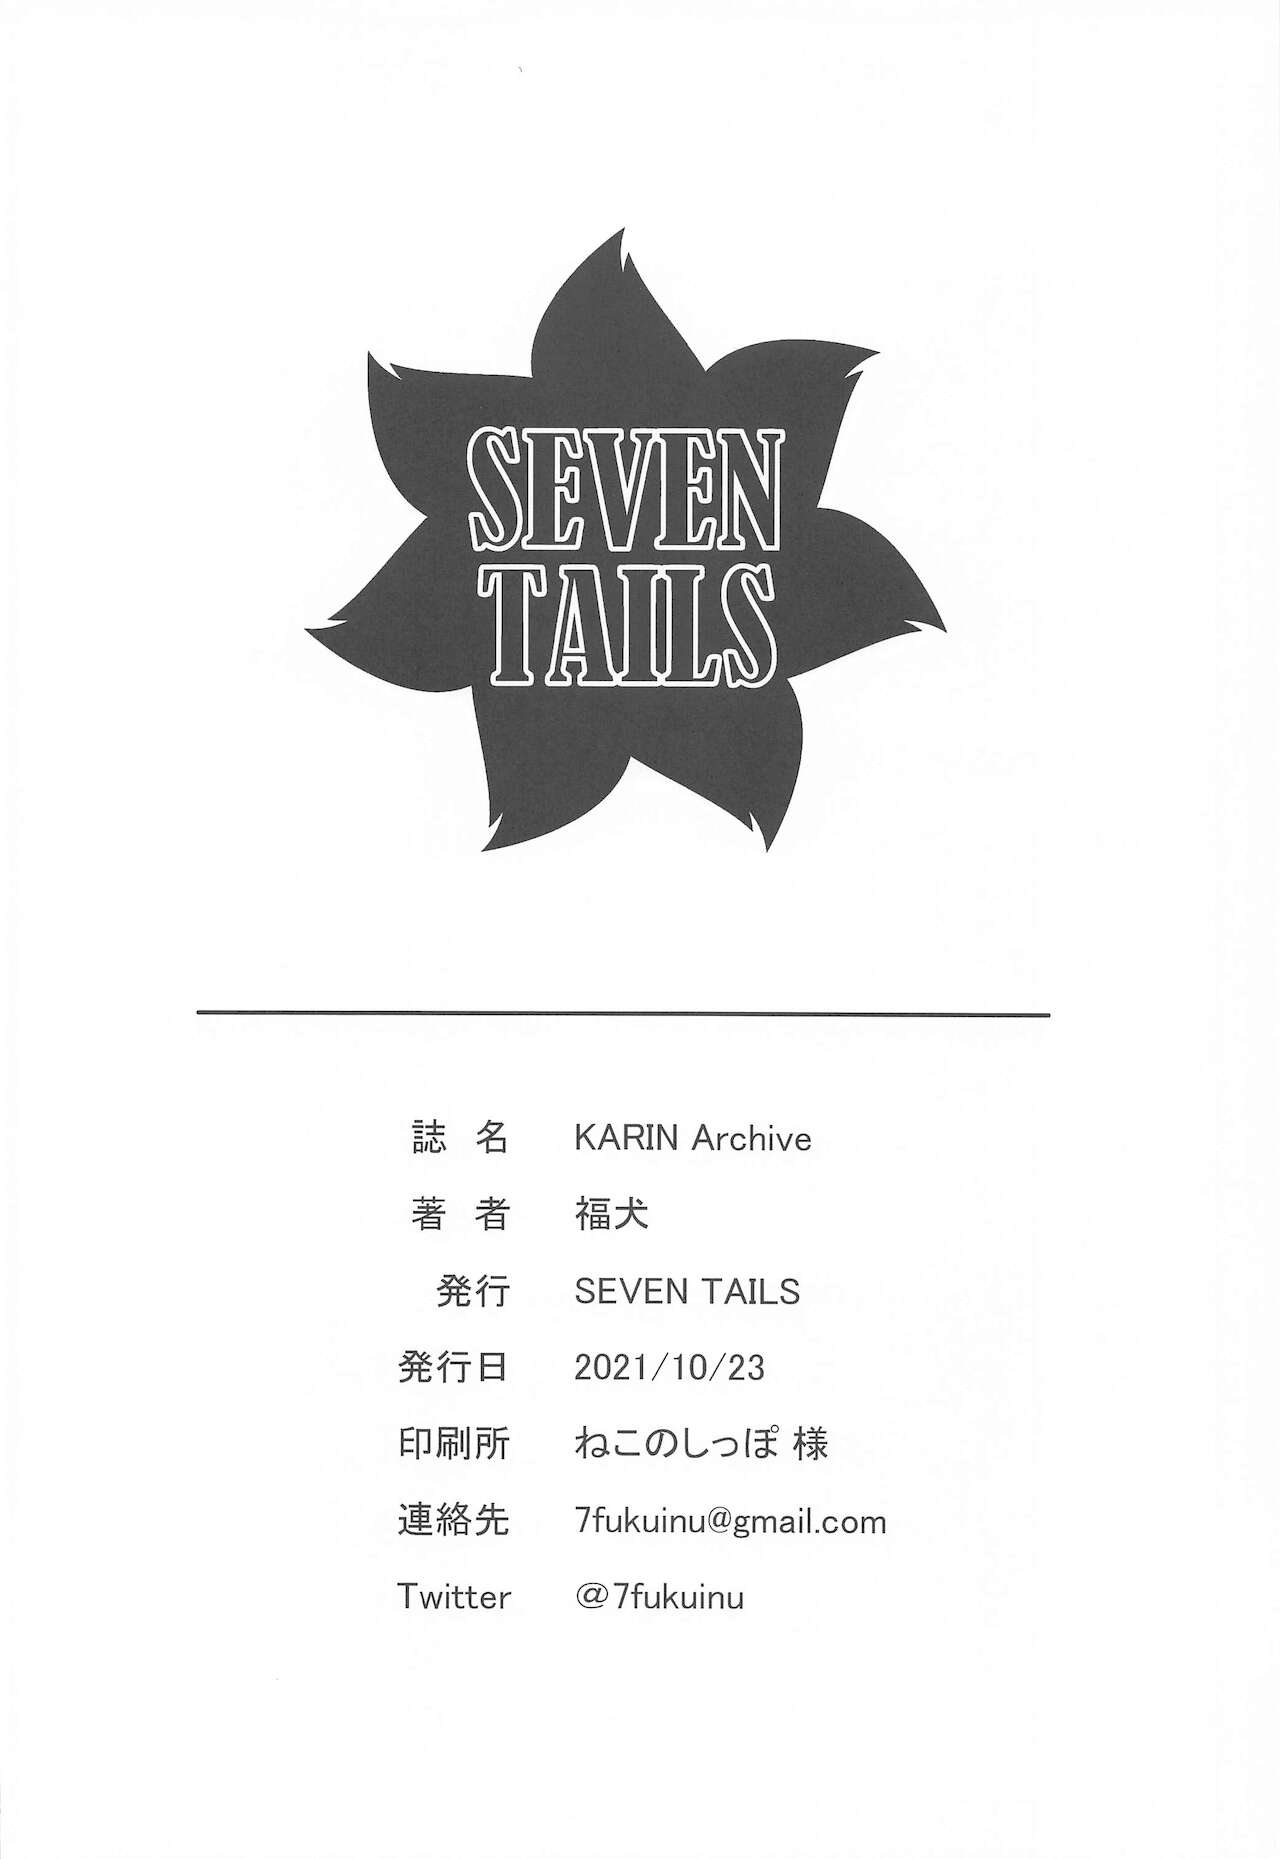 [SEVEN TAILS] KARIN Archive (ブルーアーカイブ)